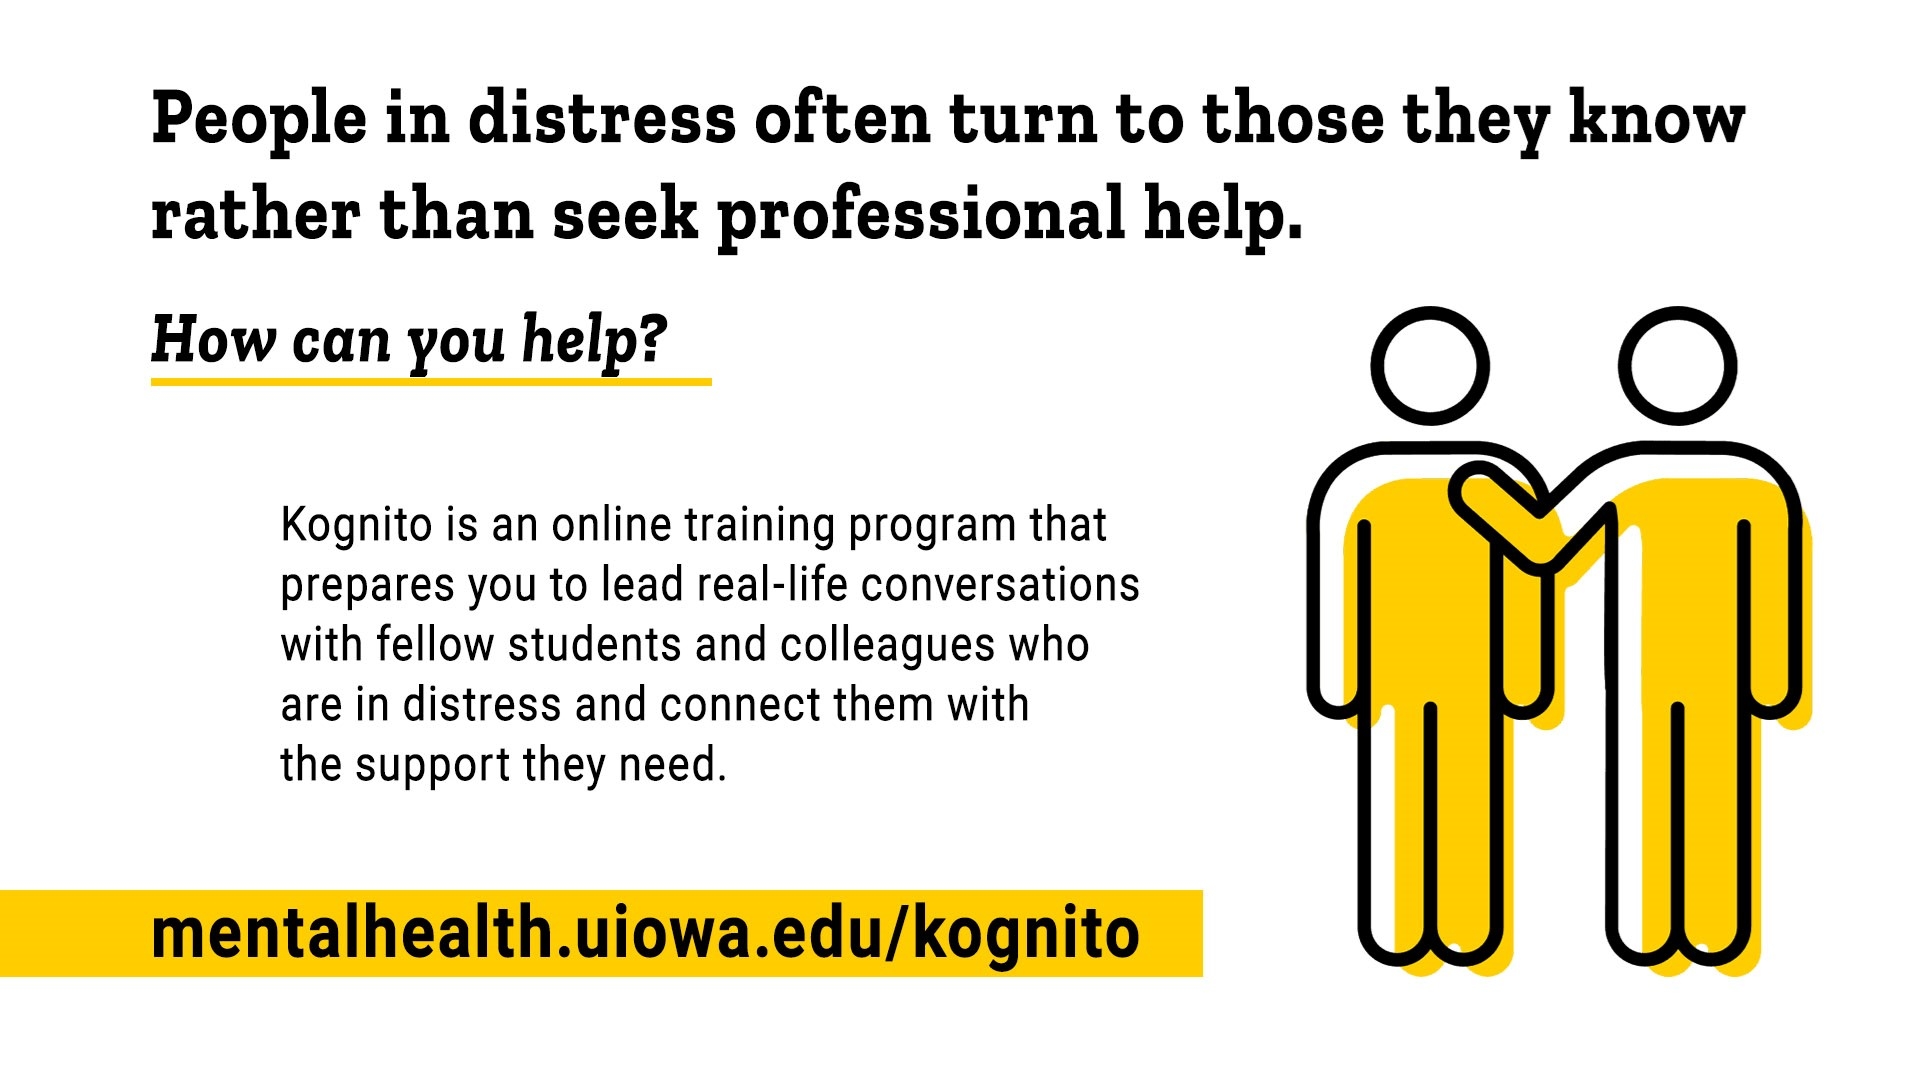 Kognito is online training that prepares you to lead conversations with students and colleagues who are in distress and connect them to support. mentalhealth.uiowa.edu/kognito